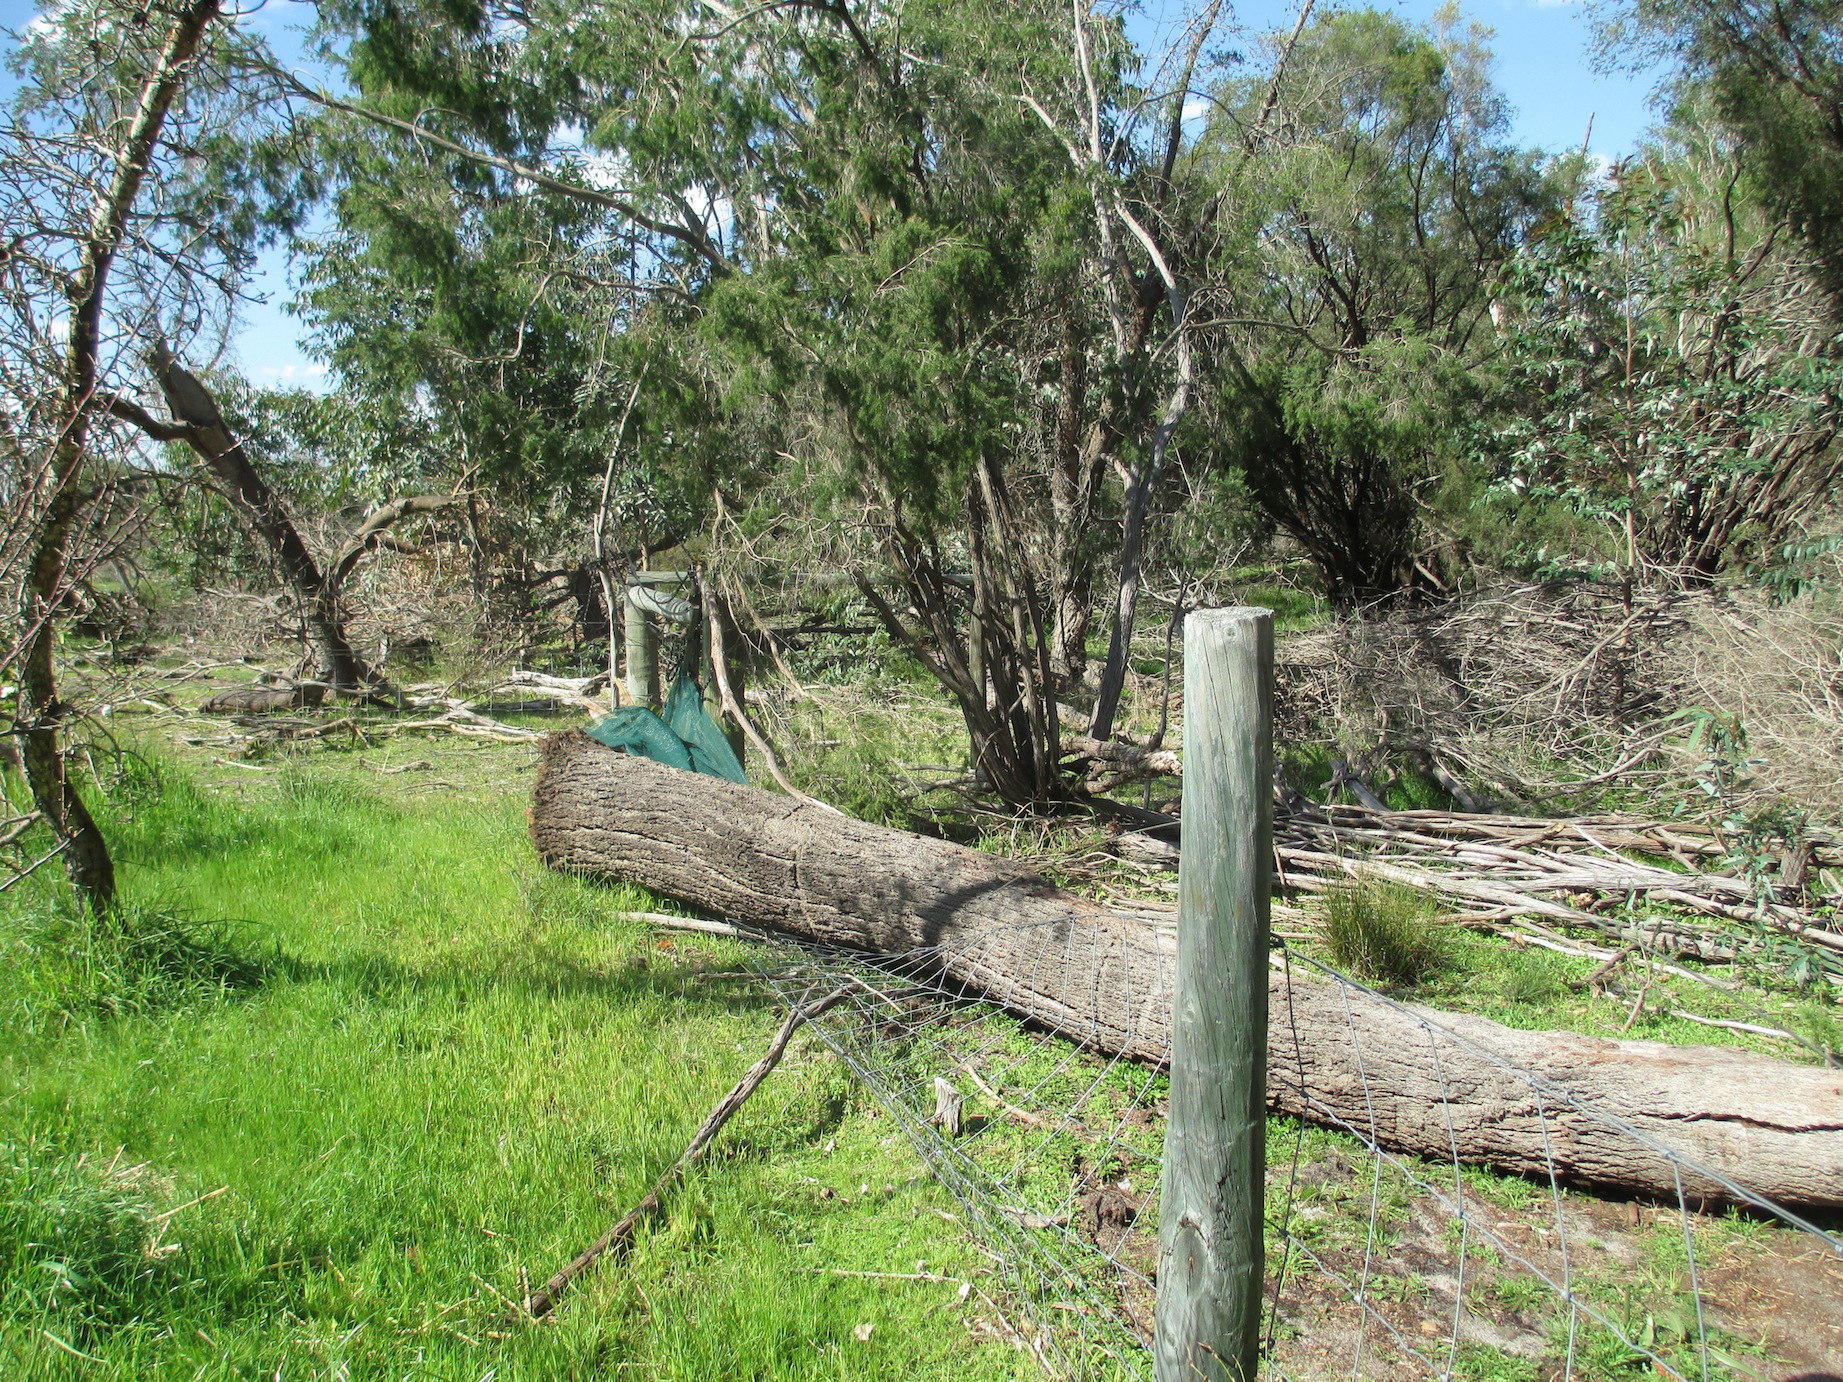 Tree fallen on orchard fence